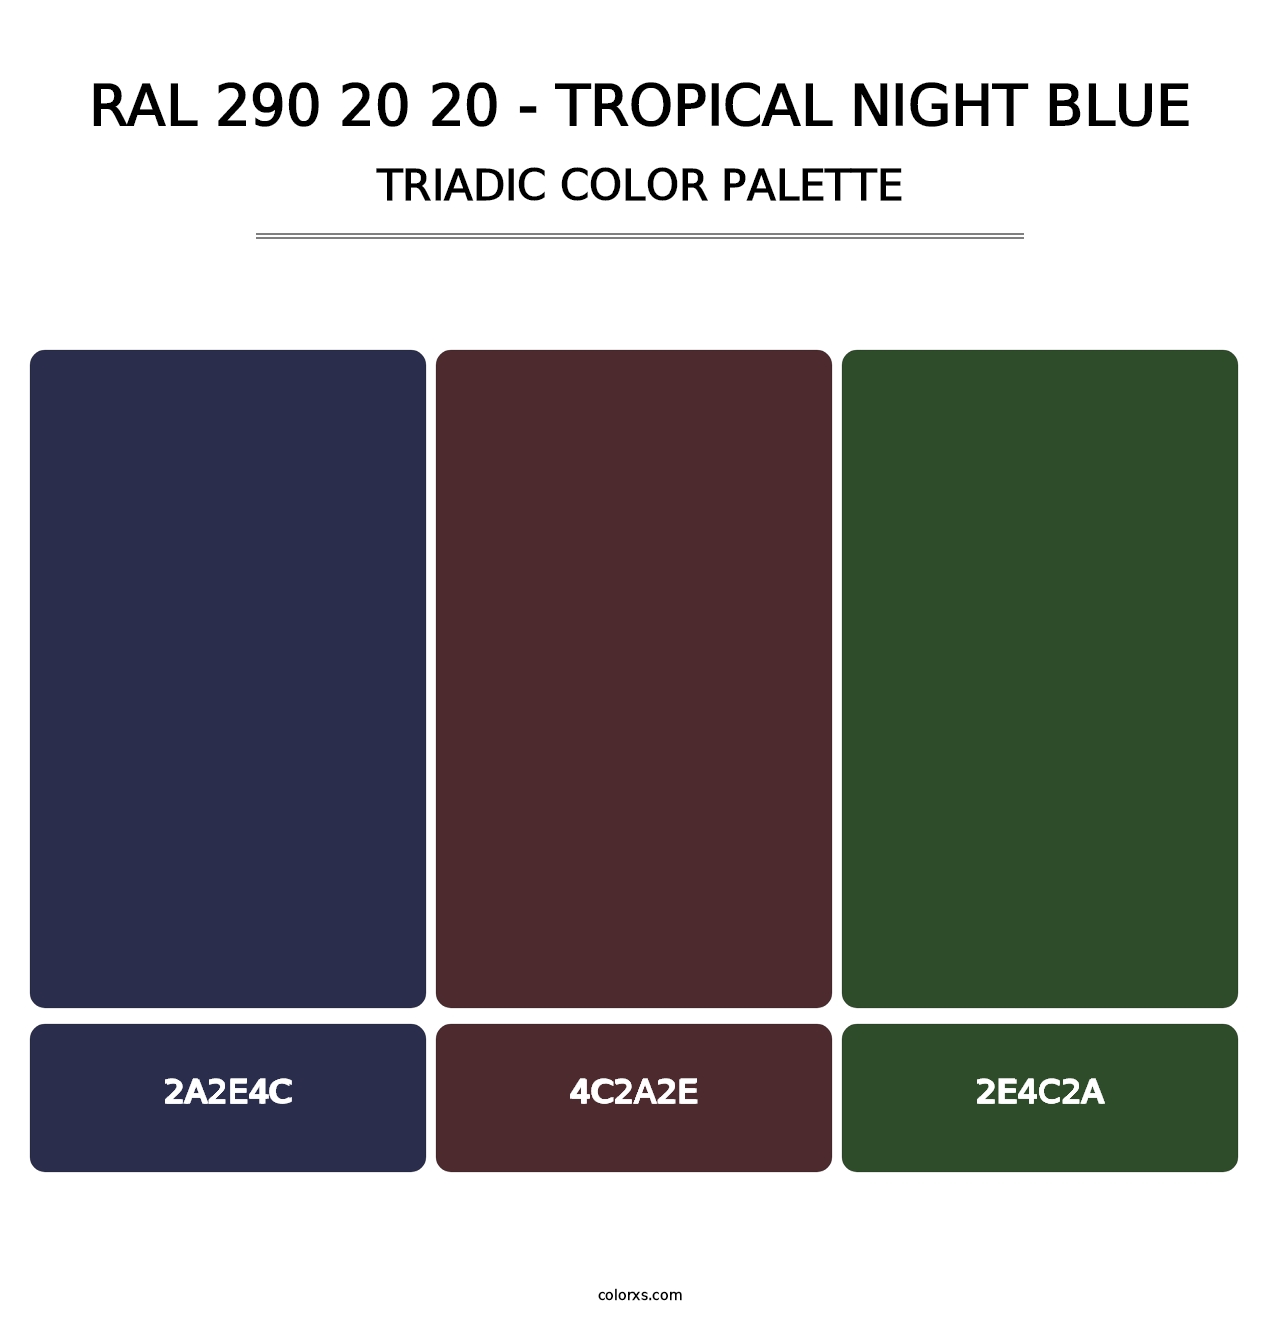 RAL 290 20 20 - Tropical Night Blue - Triadic Color Palette